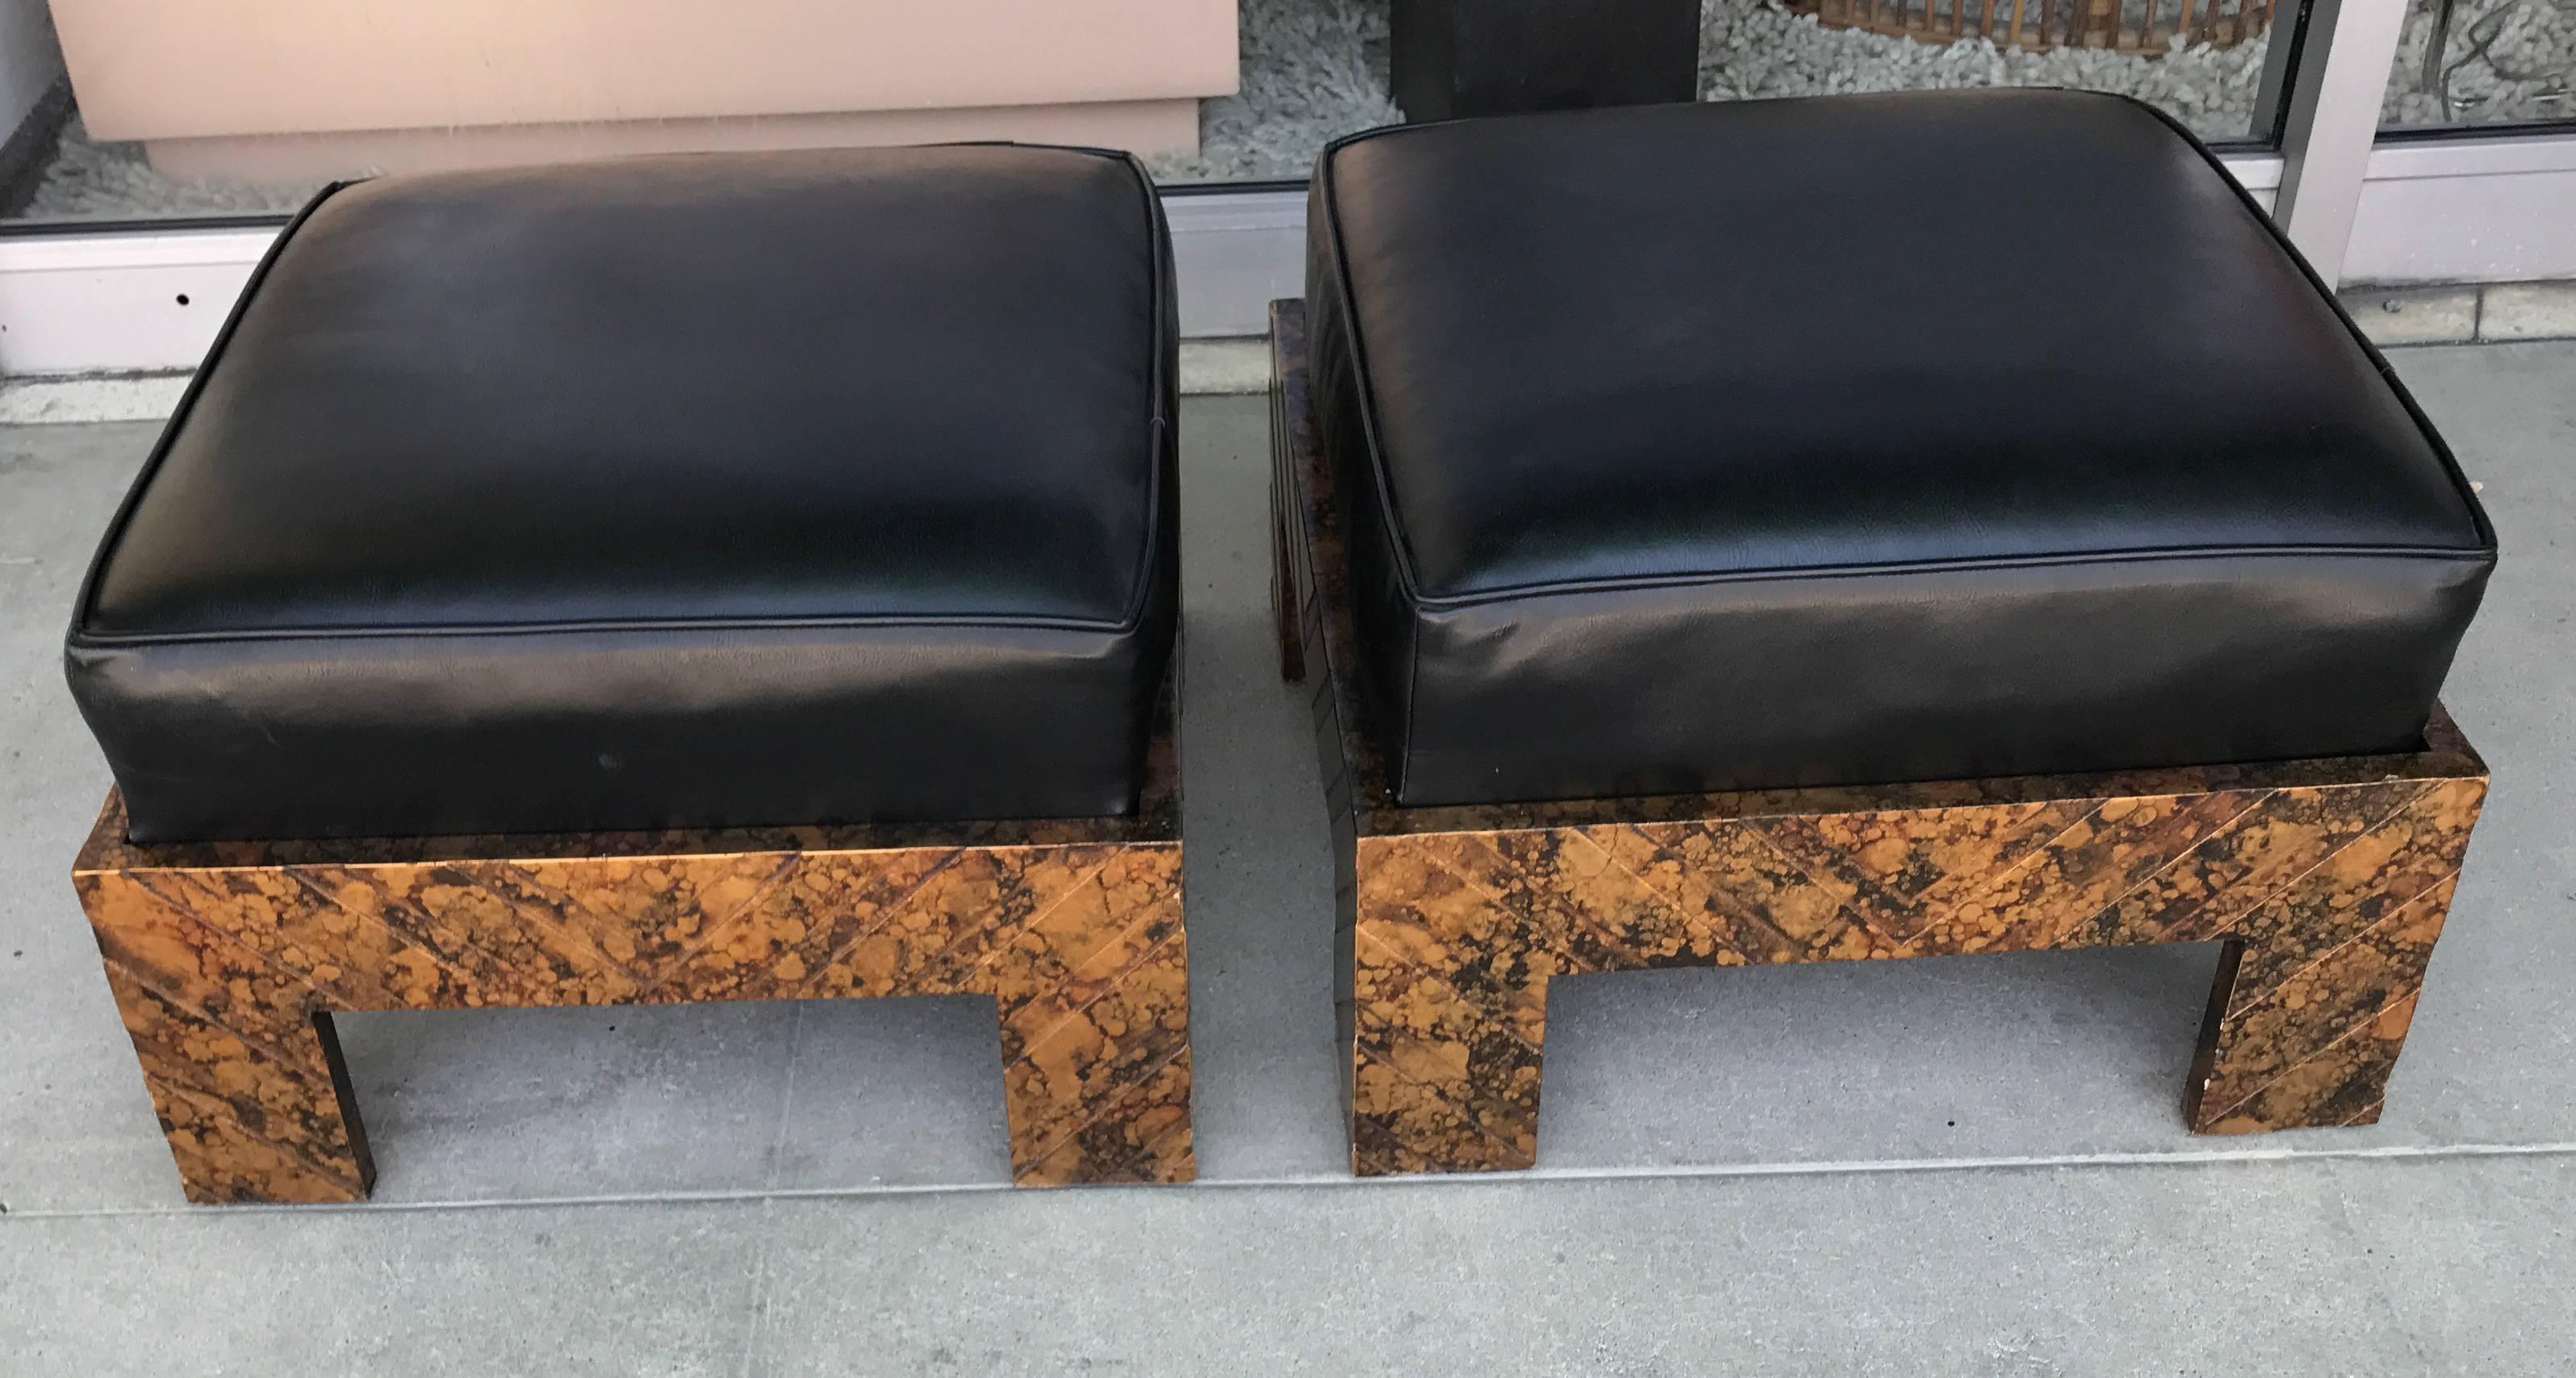 This amazing set came from all original, professionally decorated Palm Springs Estate. This living room piece is in excellent condition, the top has been used its entire life with a glass top so the herringbone tortoise finish looks as new. The